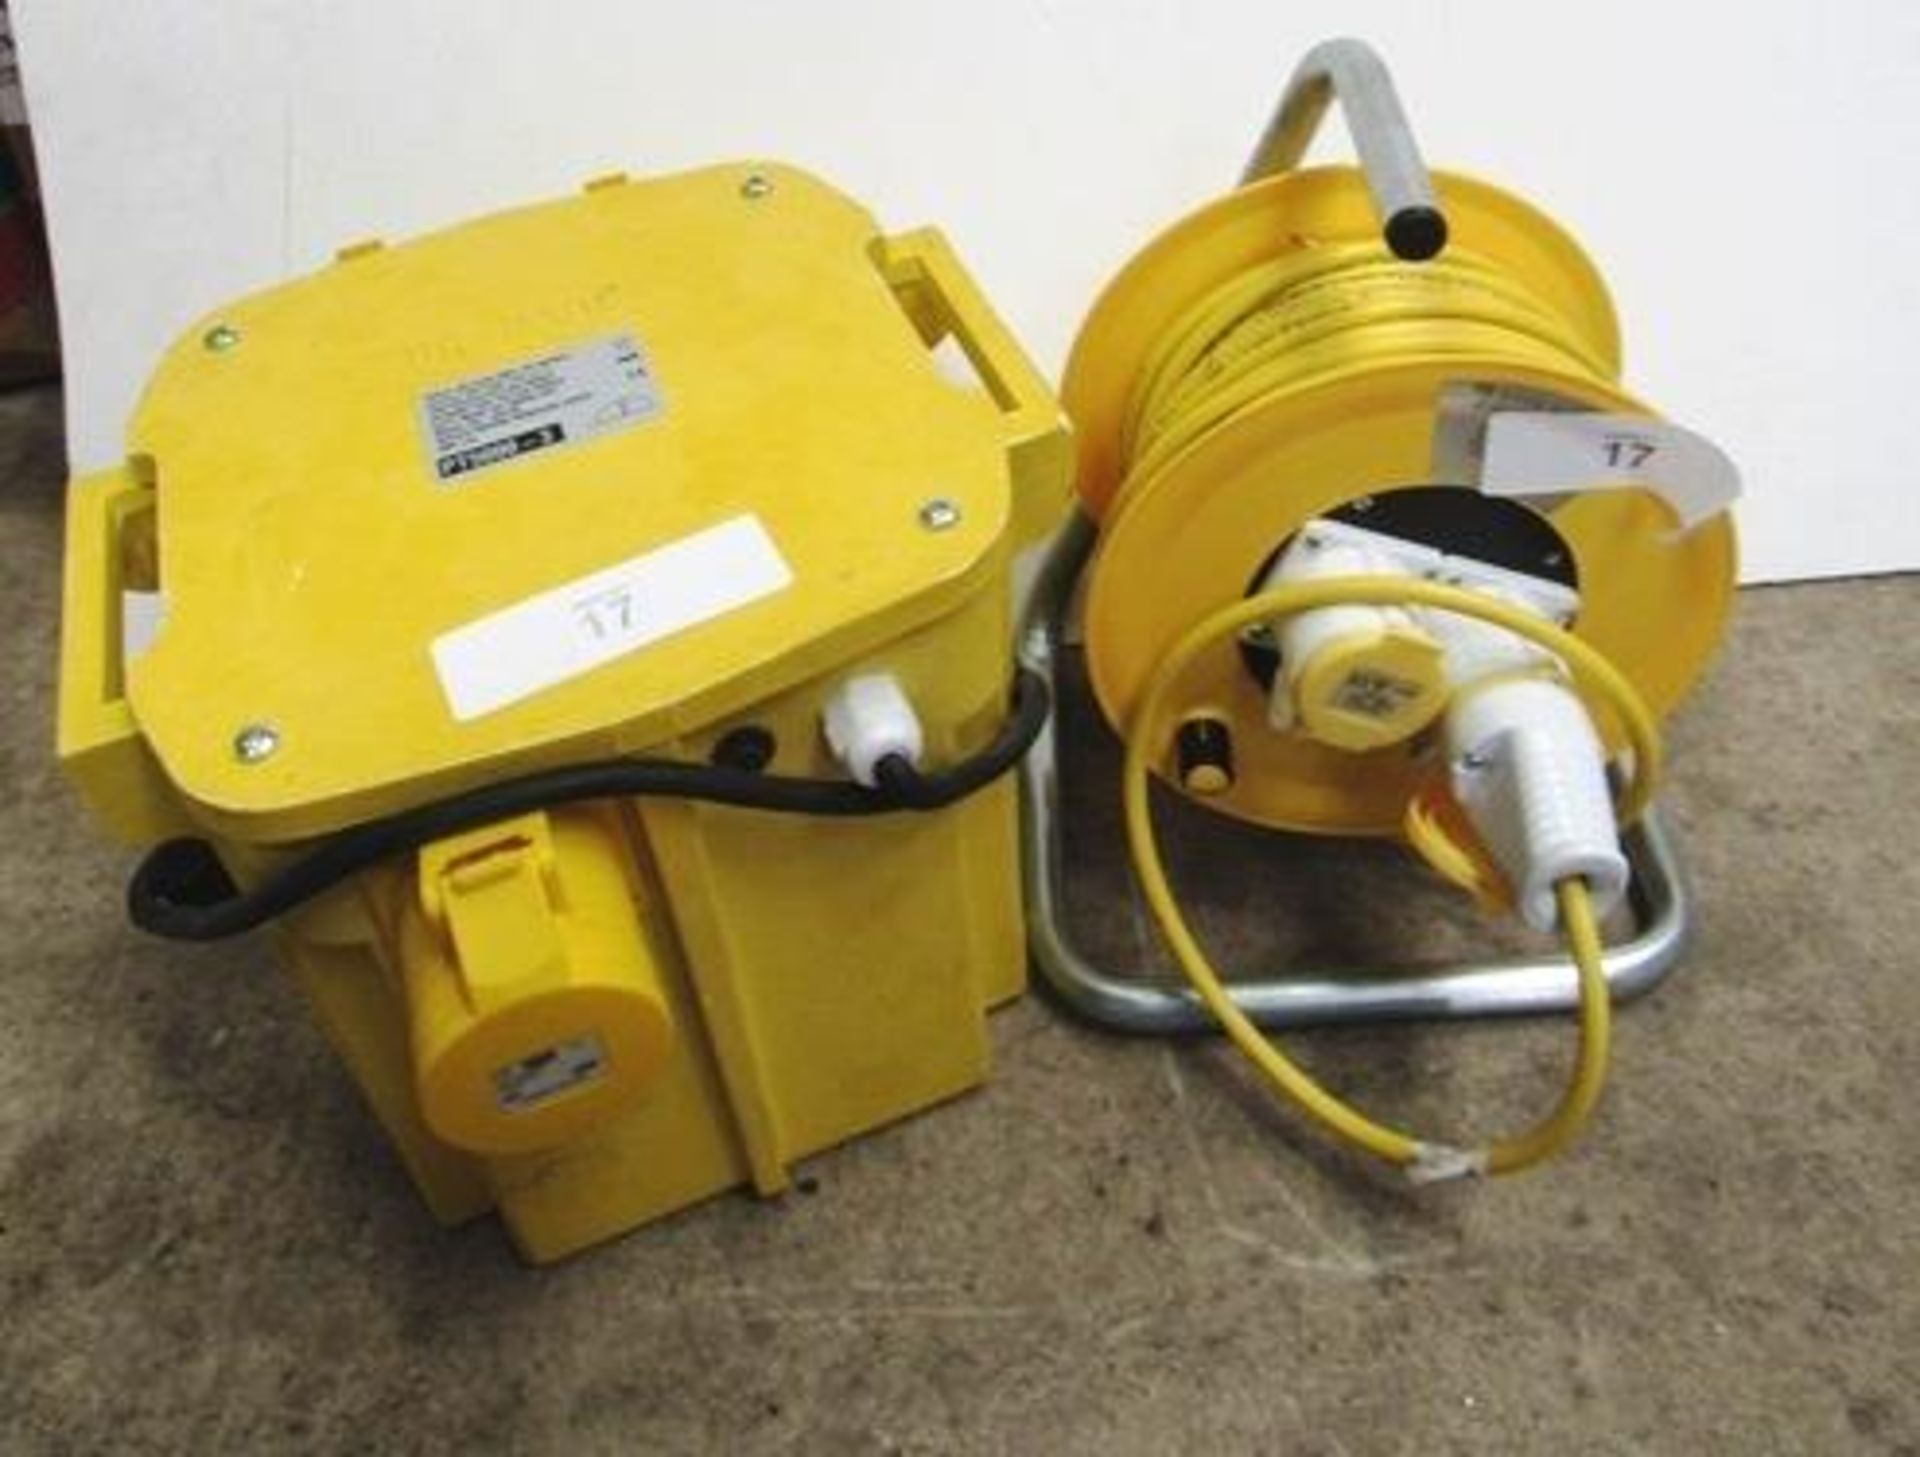 A 110V single phase 2500VA ballast with 2 x 16 amp output and 1 x 32 amp output, model PT5000-3,